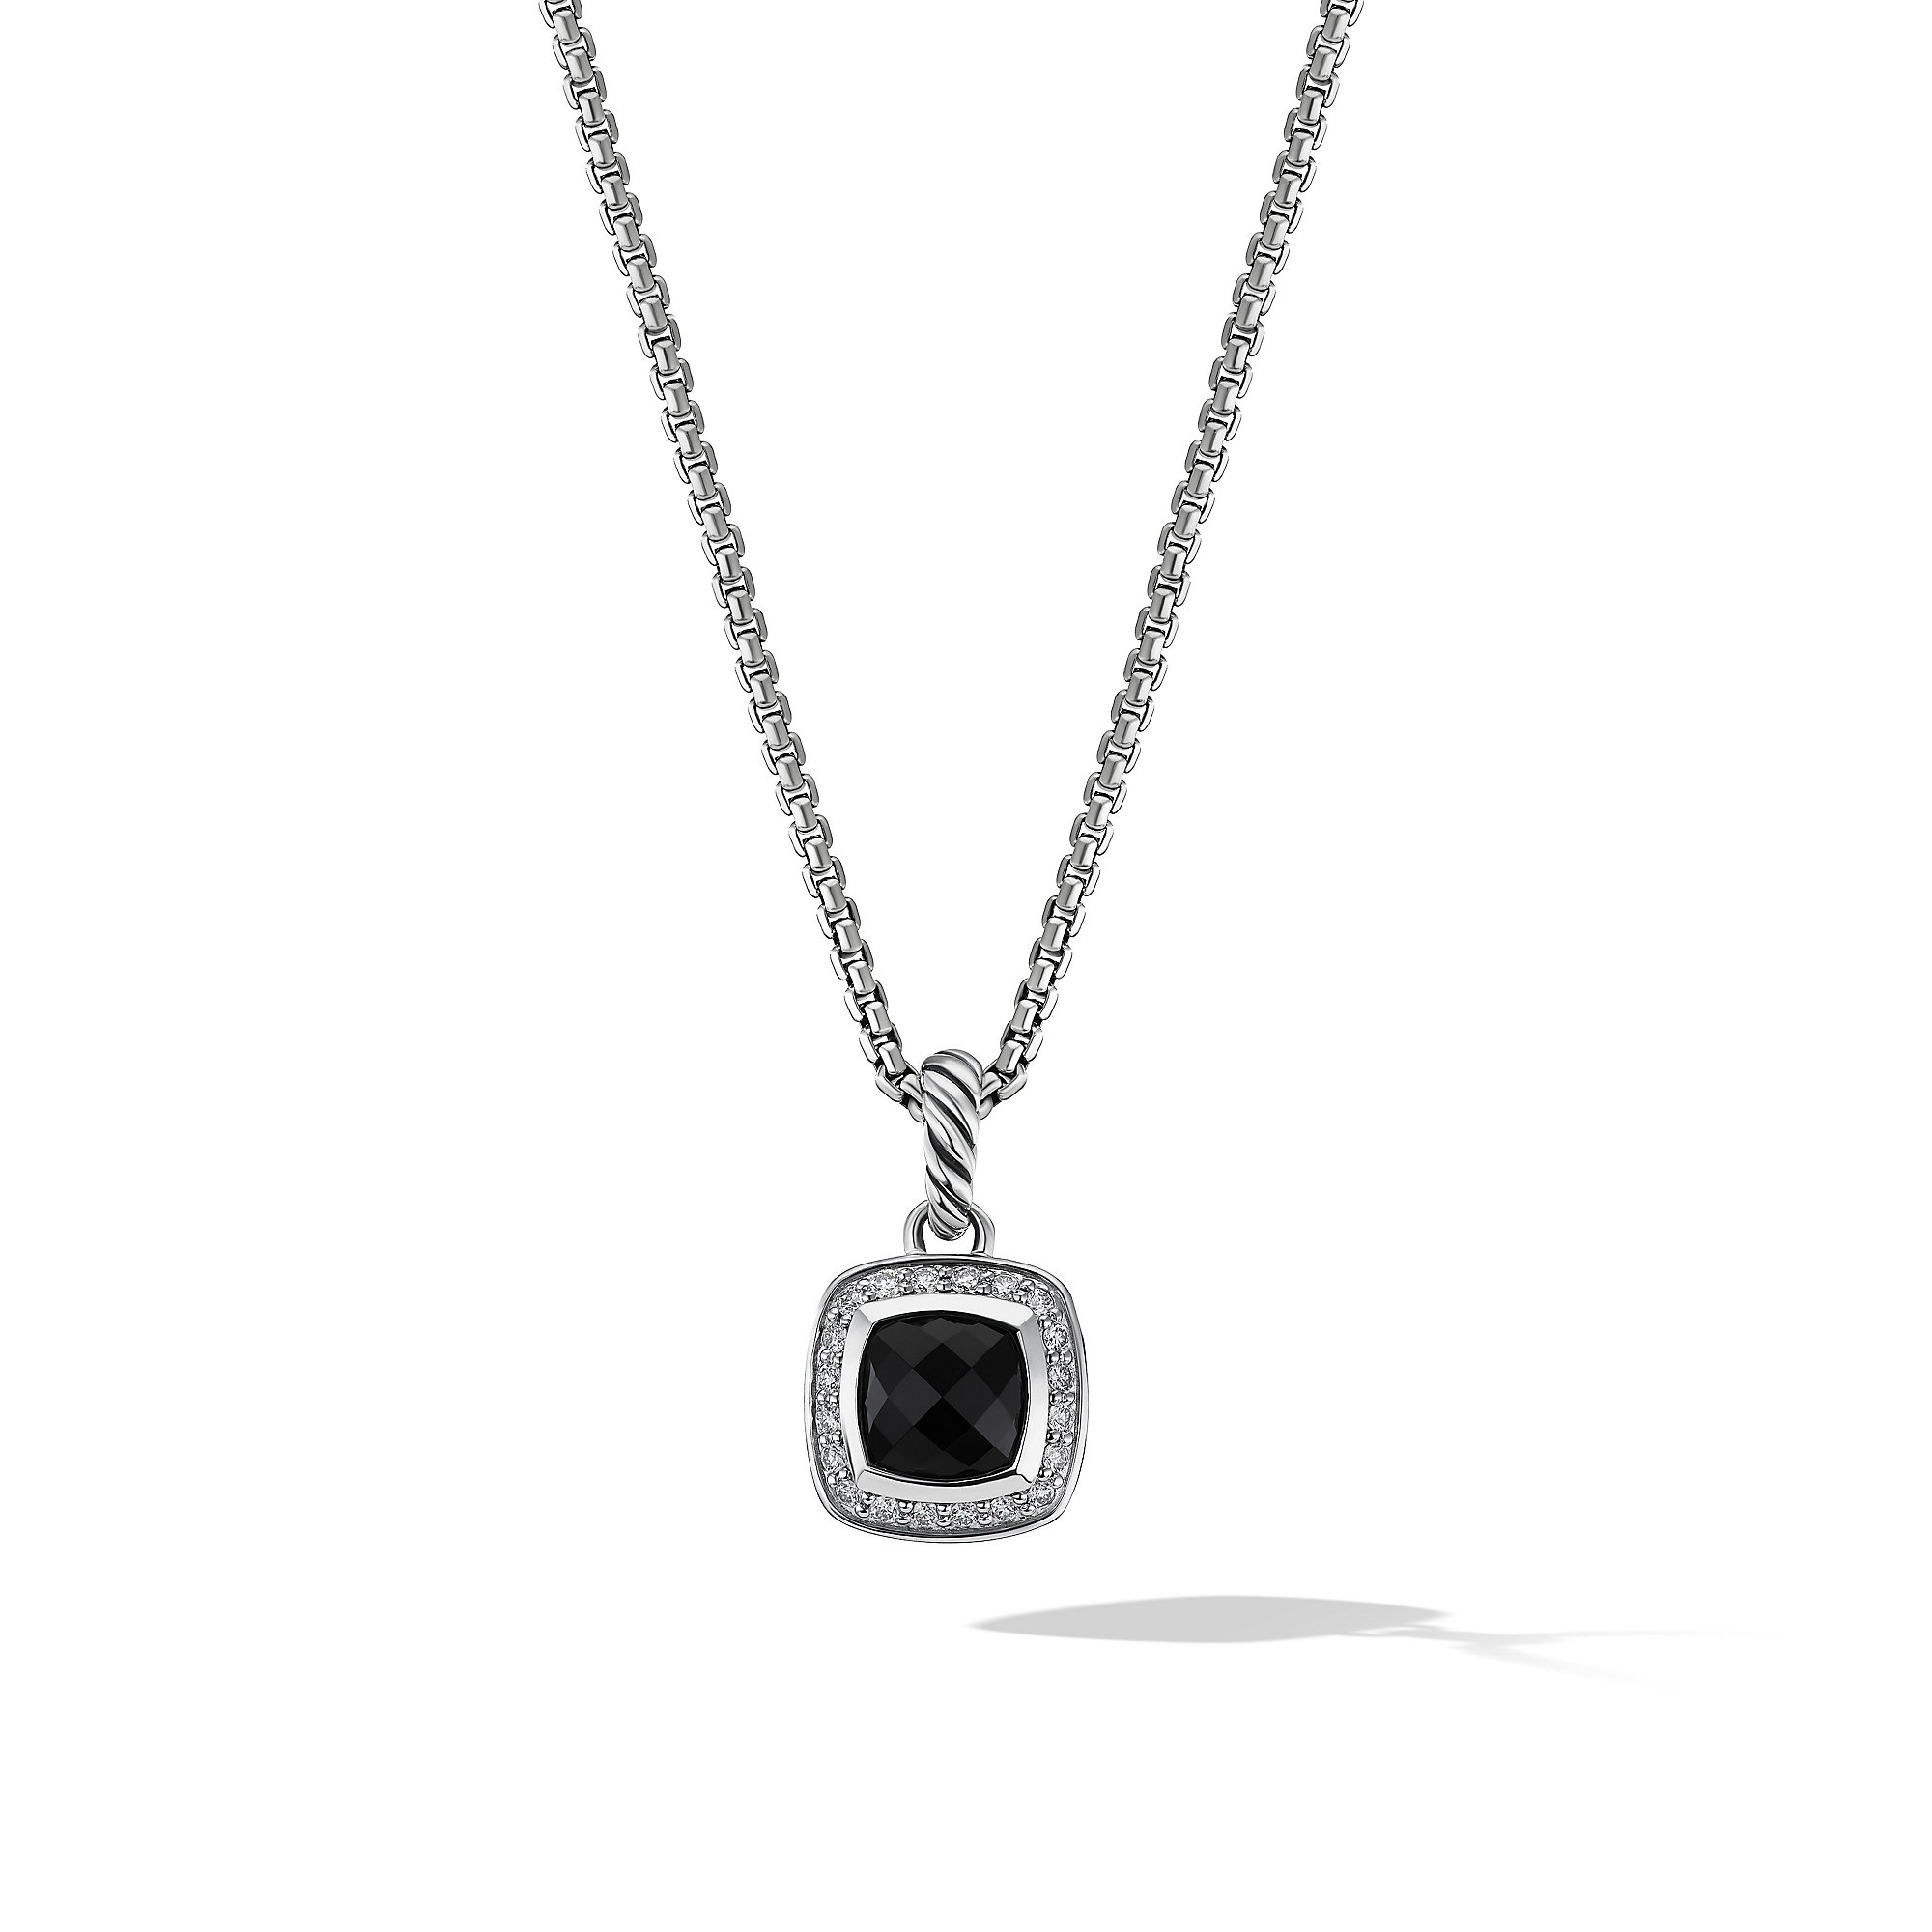 Petite Albion® Pendant Necklace in Sterling Silver with Black Onyx and Pave Diamonds